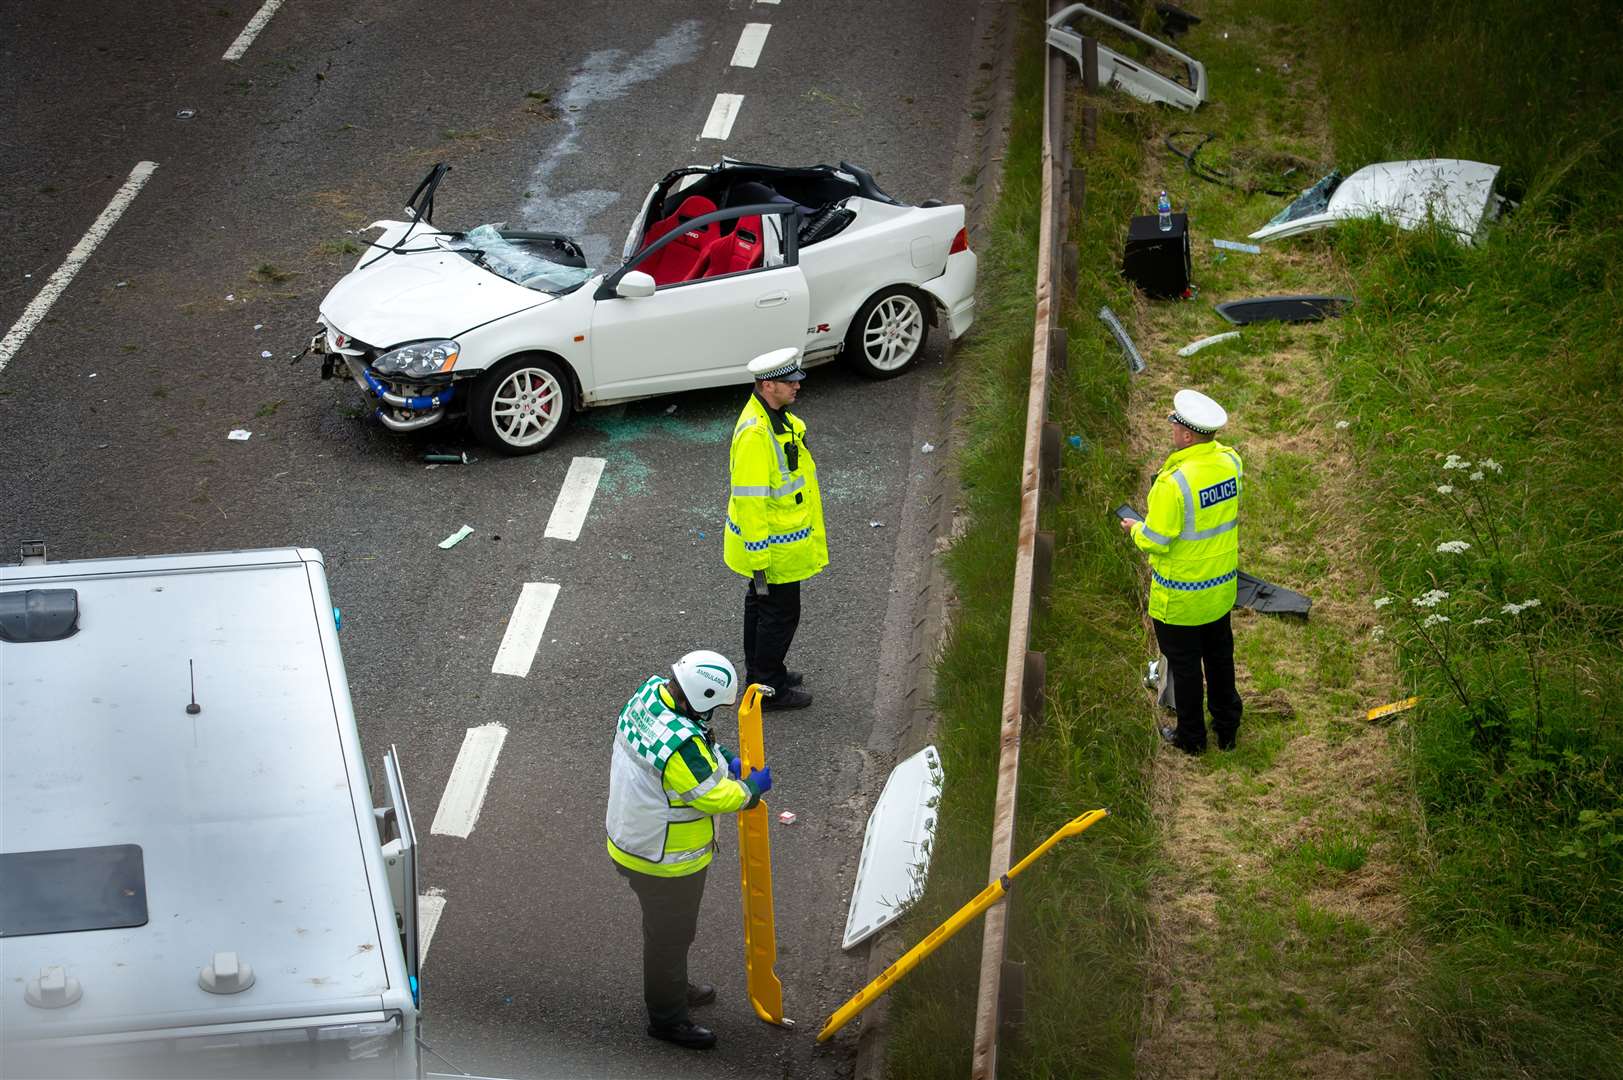 Police officers investigating the scene of the car crash on the A9 yesterday afternoon (July 13).